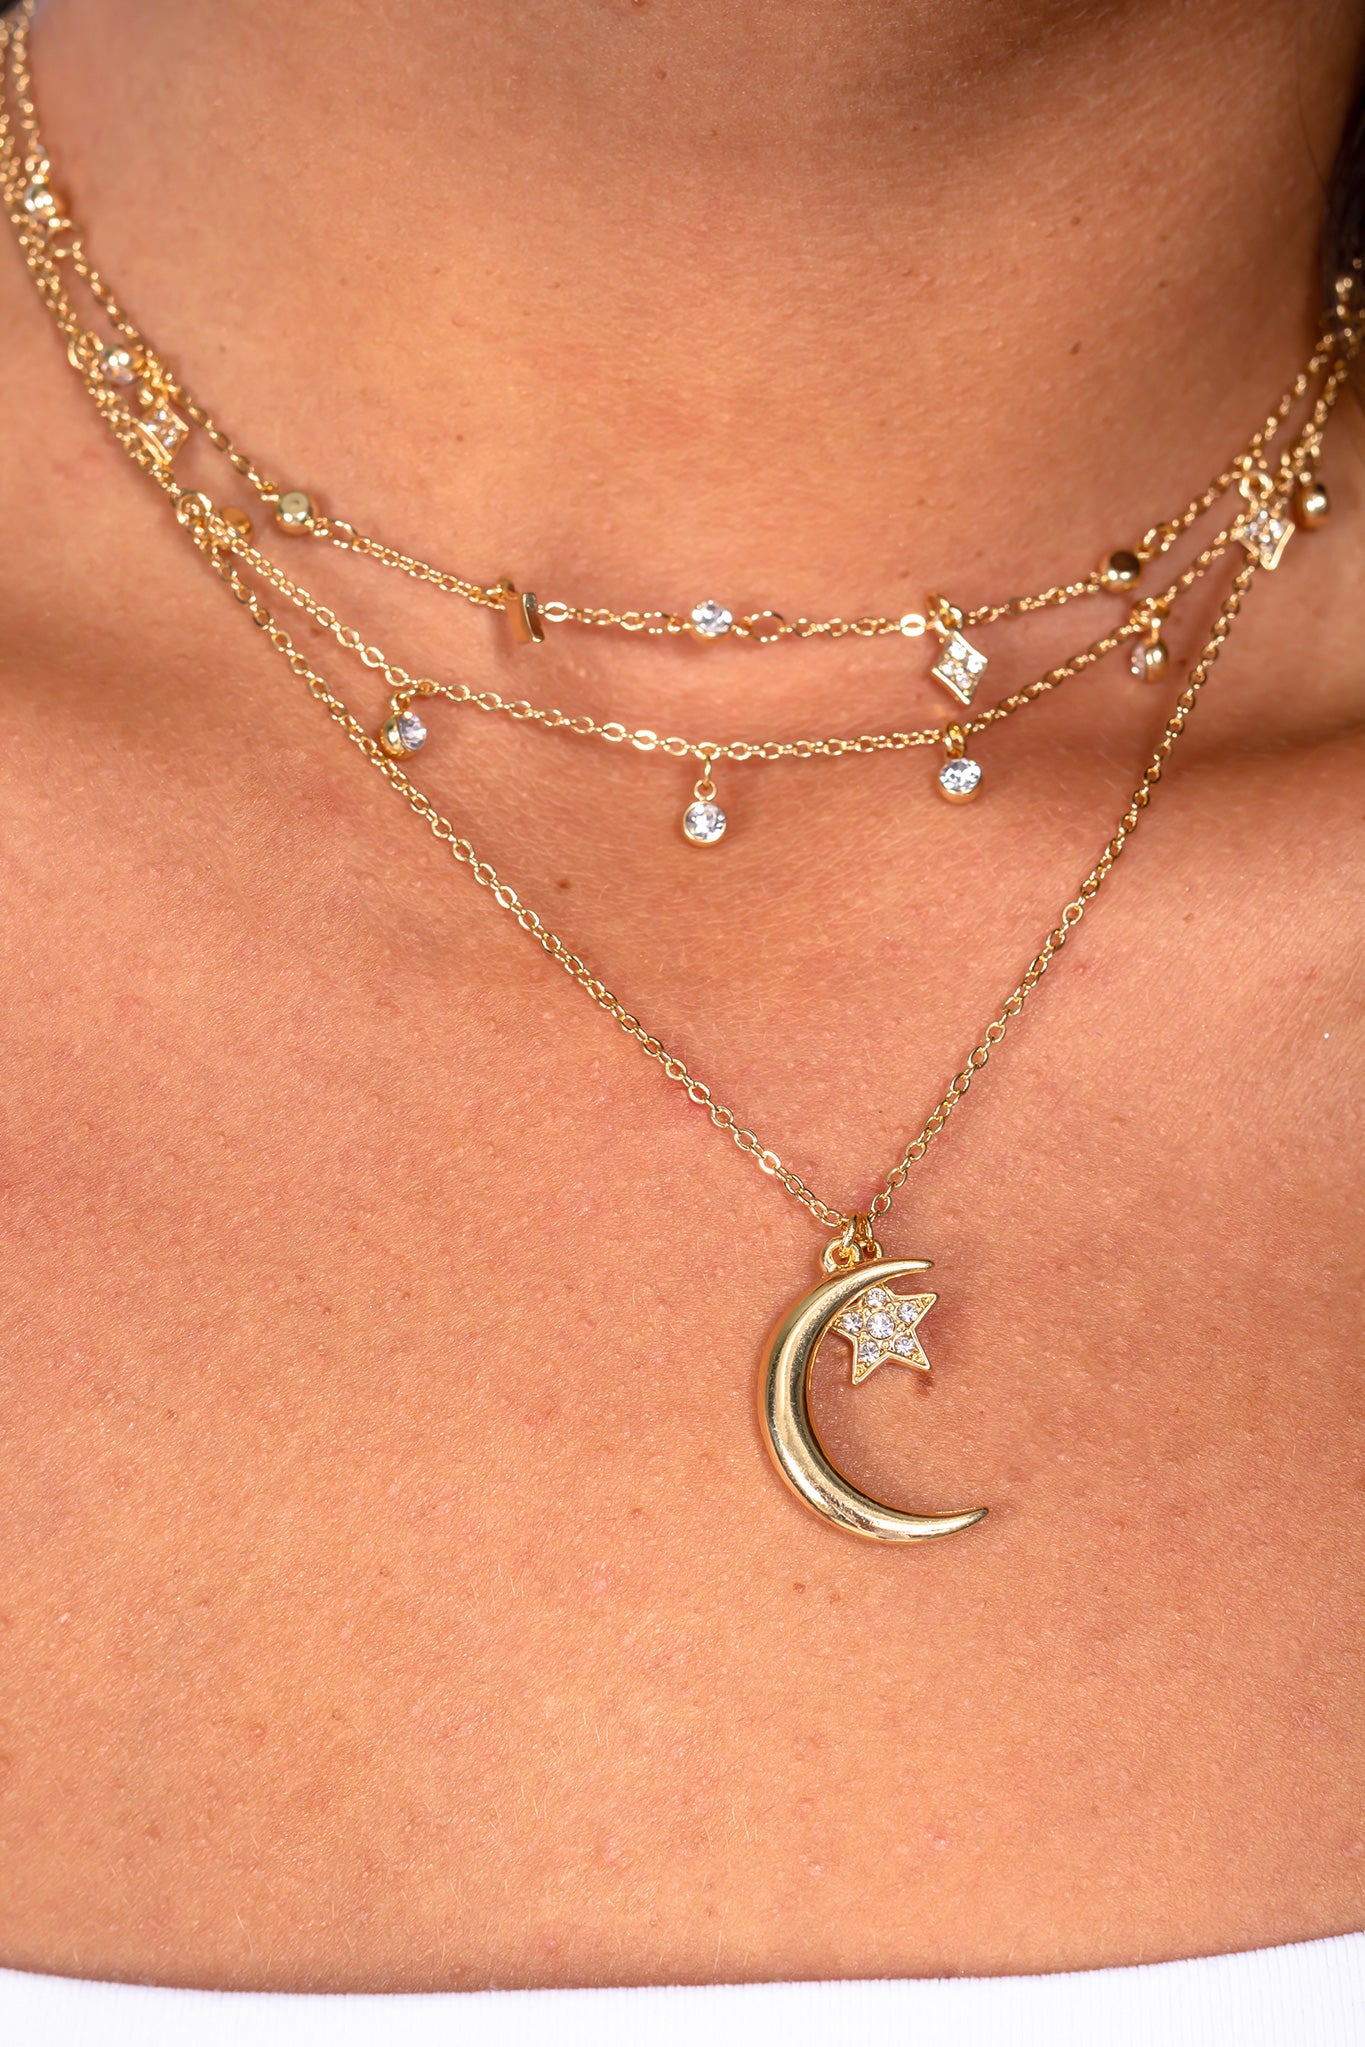 Gold Layered Necklace with Moon and Star Pendant